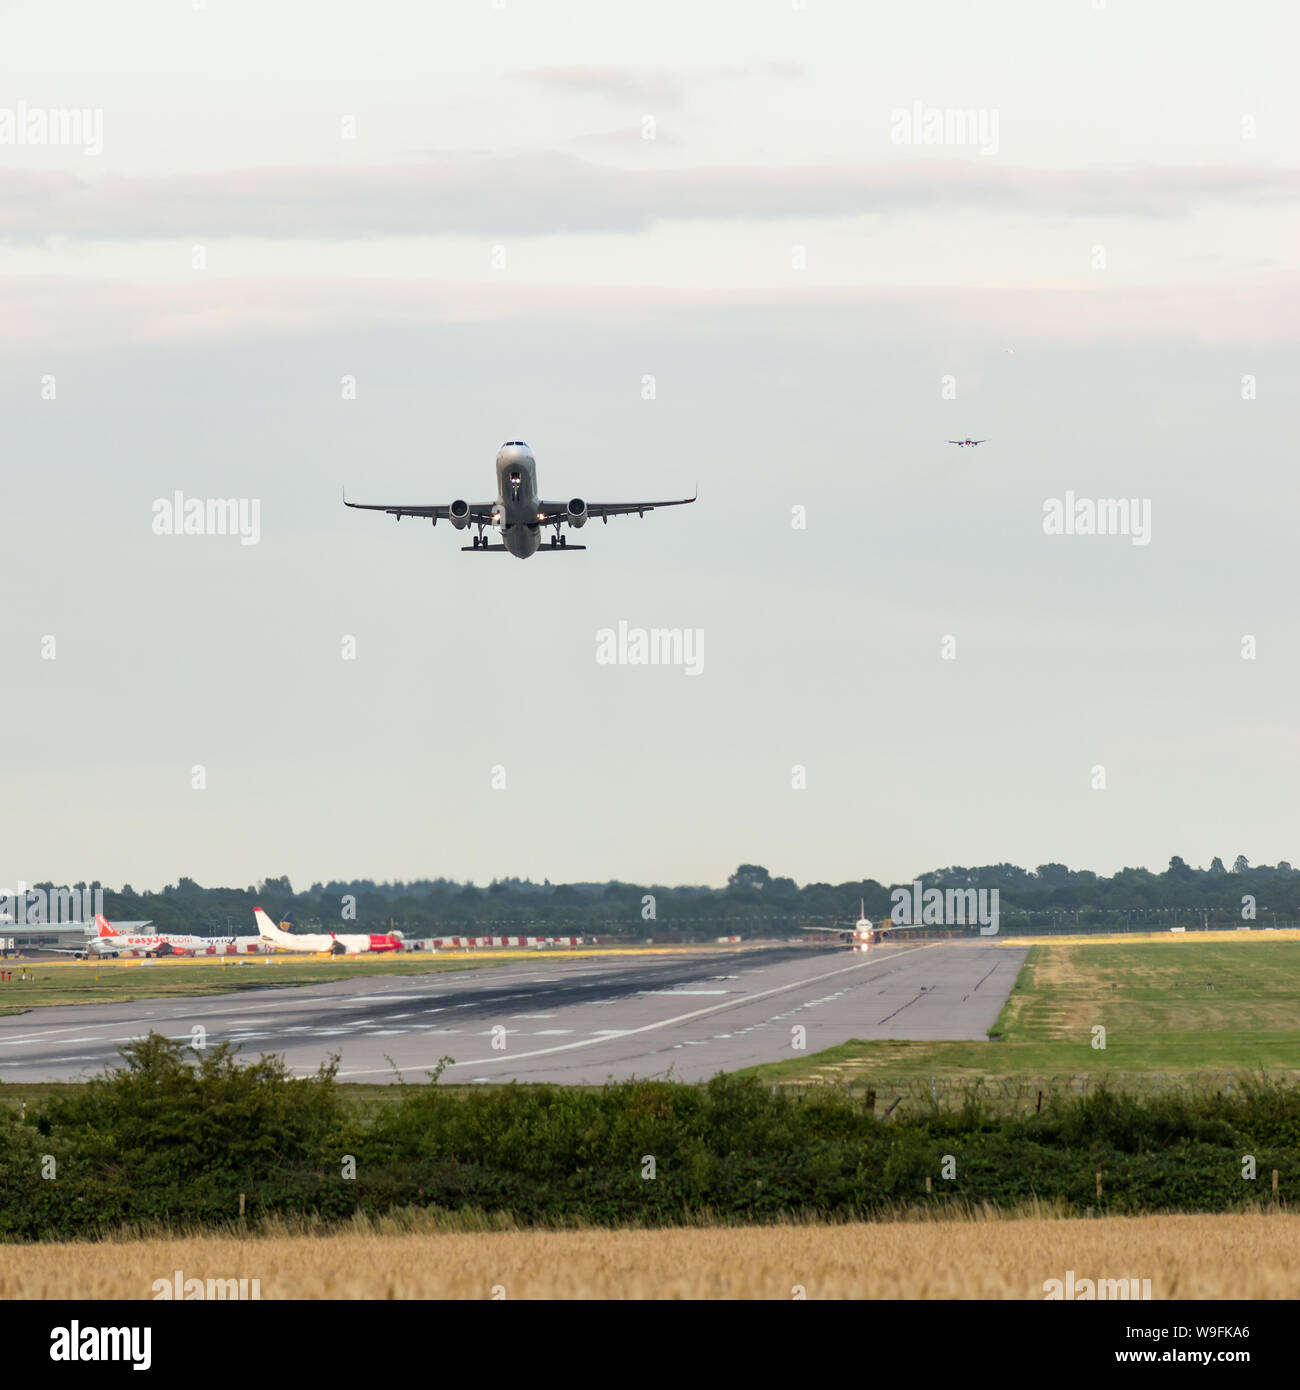 An airplane takes off as others come into land in an aircraft landing queue behind, with other planes waiting next to the runway to takeoff. Stock Photo